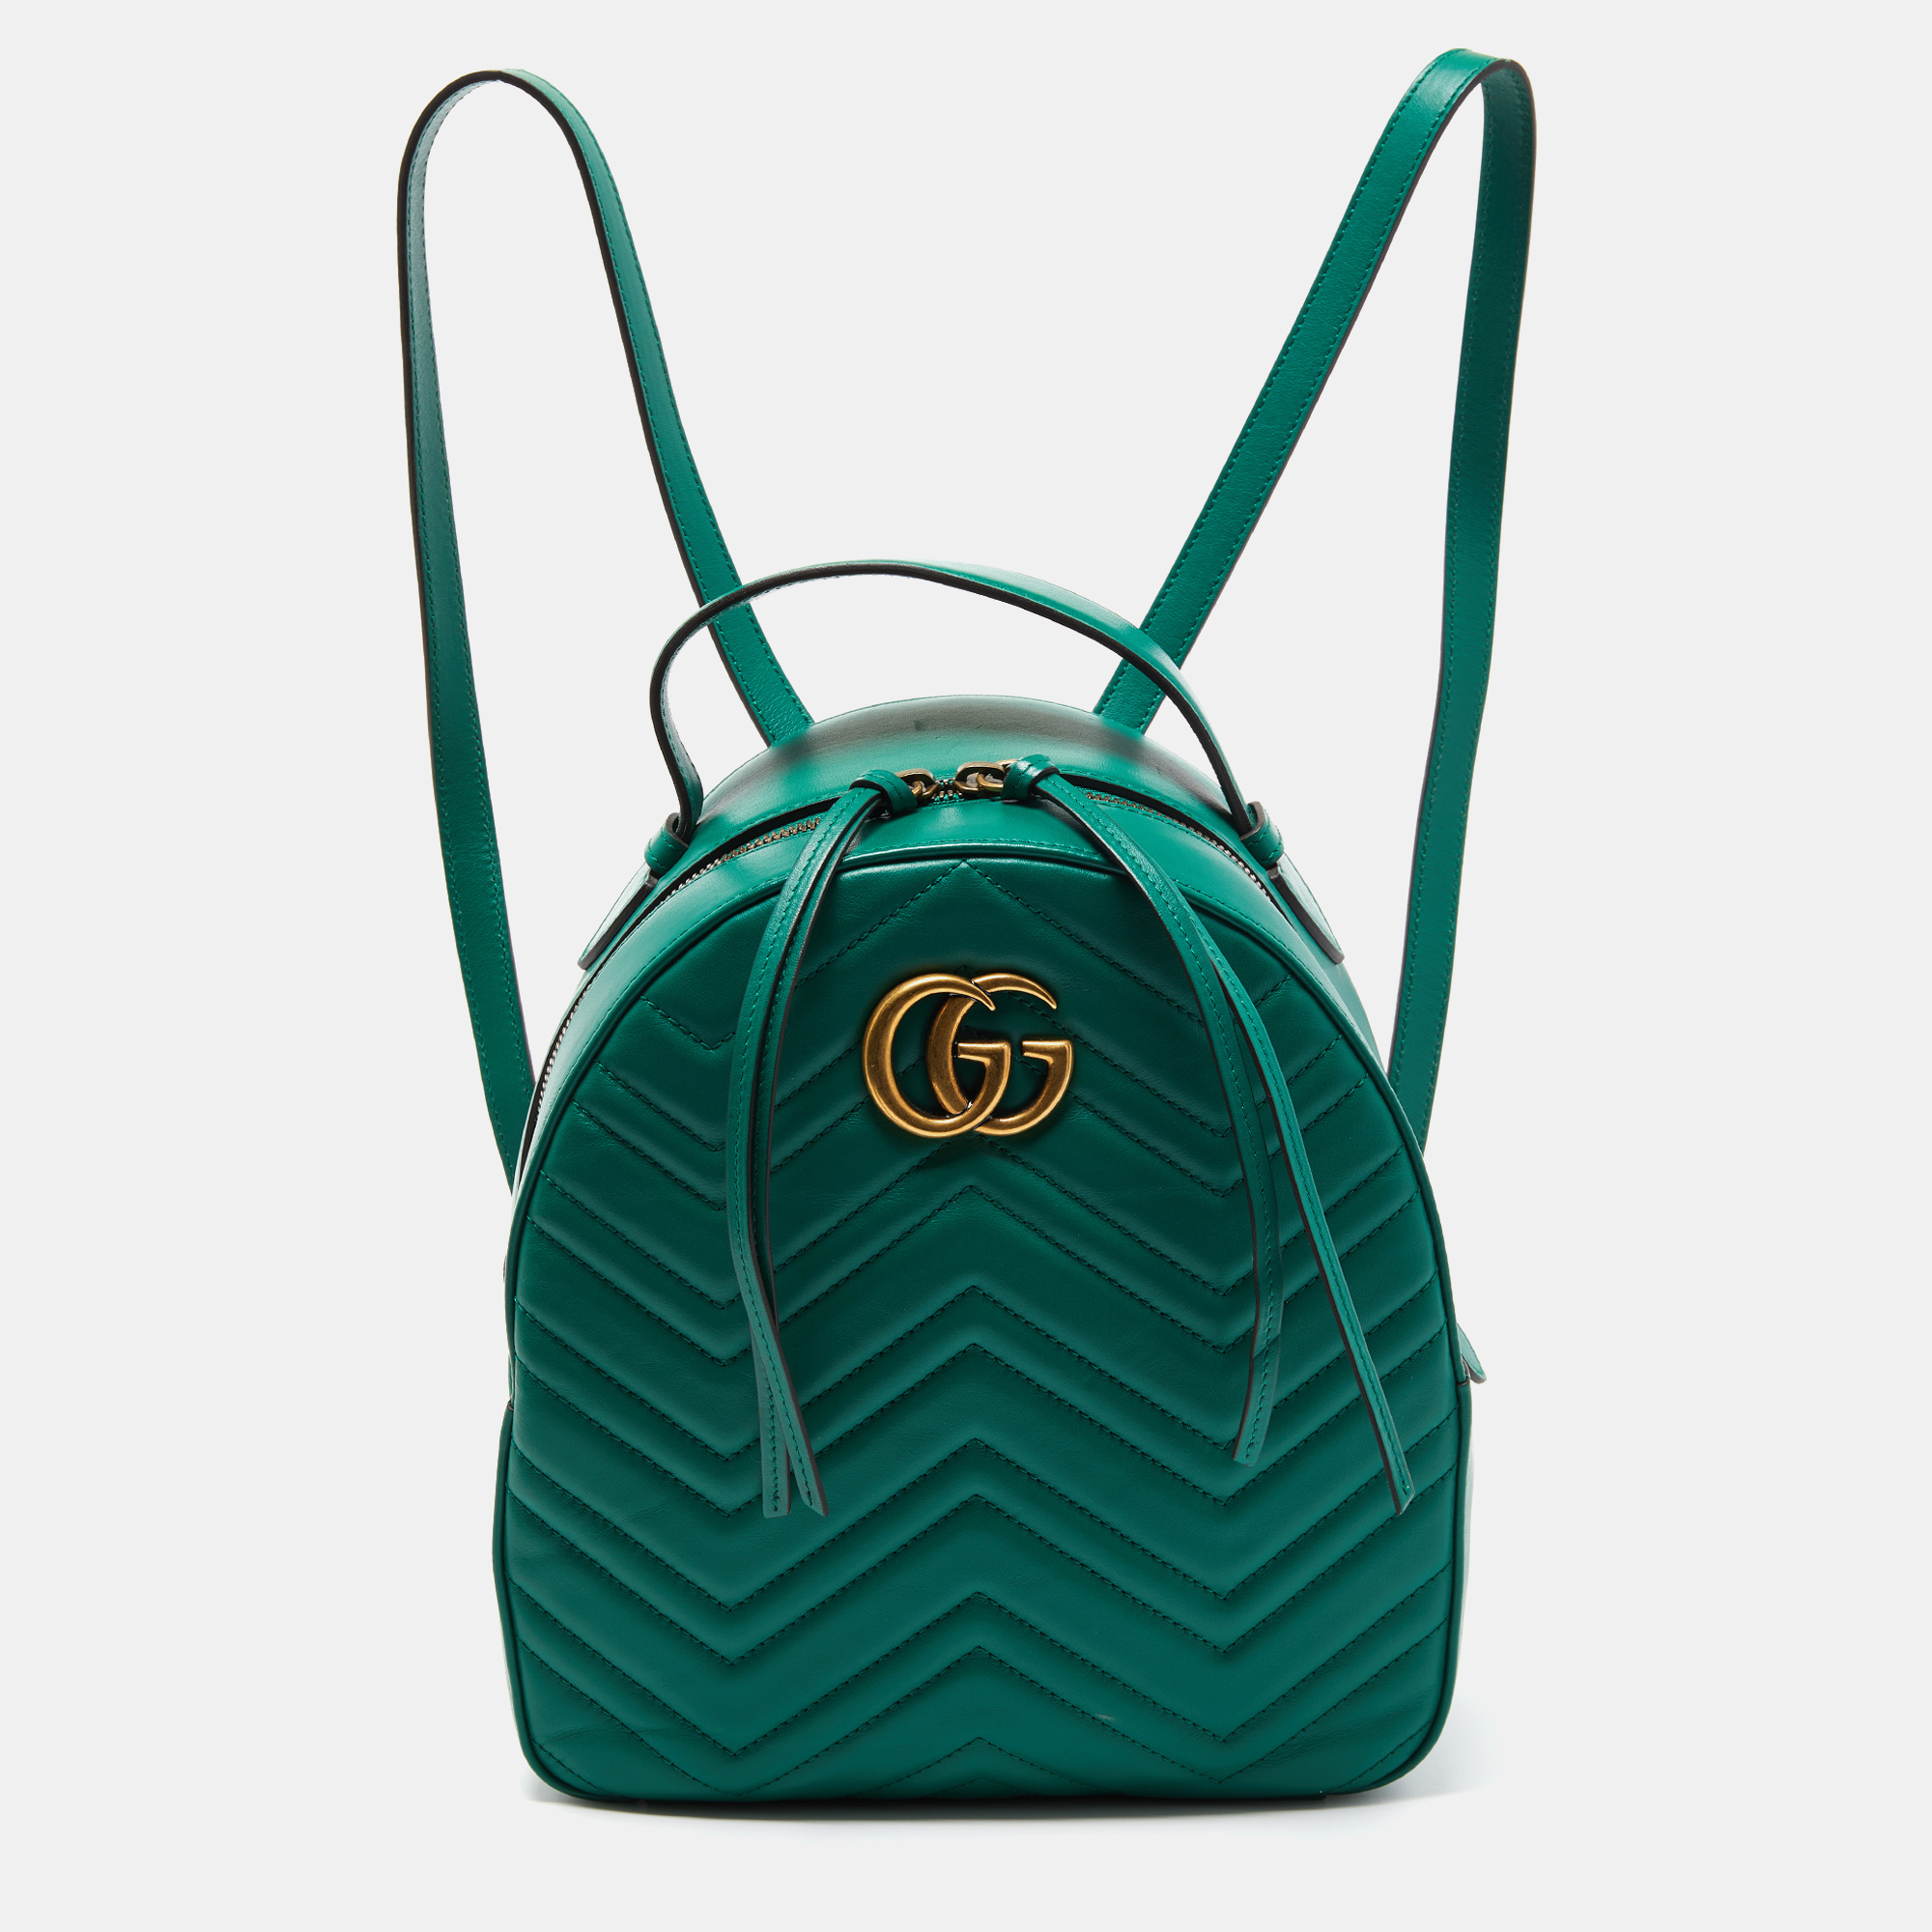 Pre-owned Gucci Green Matelassé Leather Gg Marmont Backpack